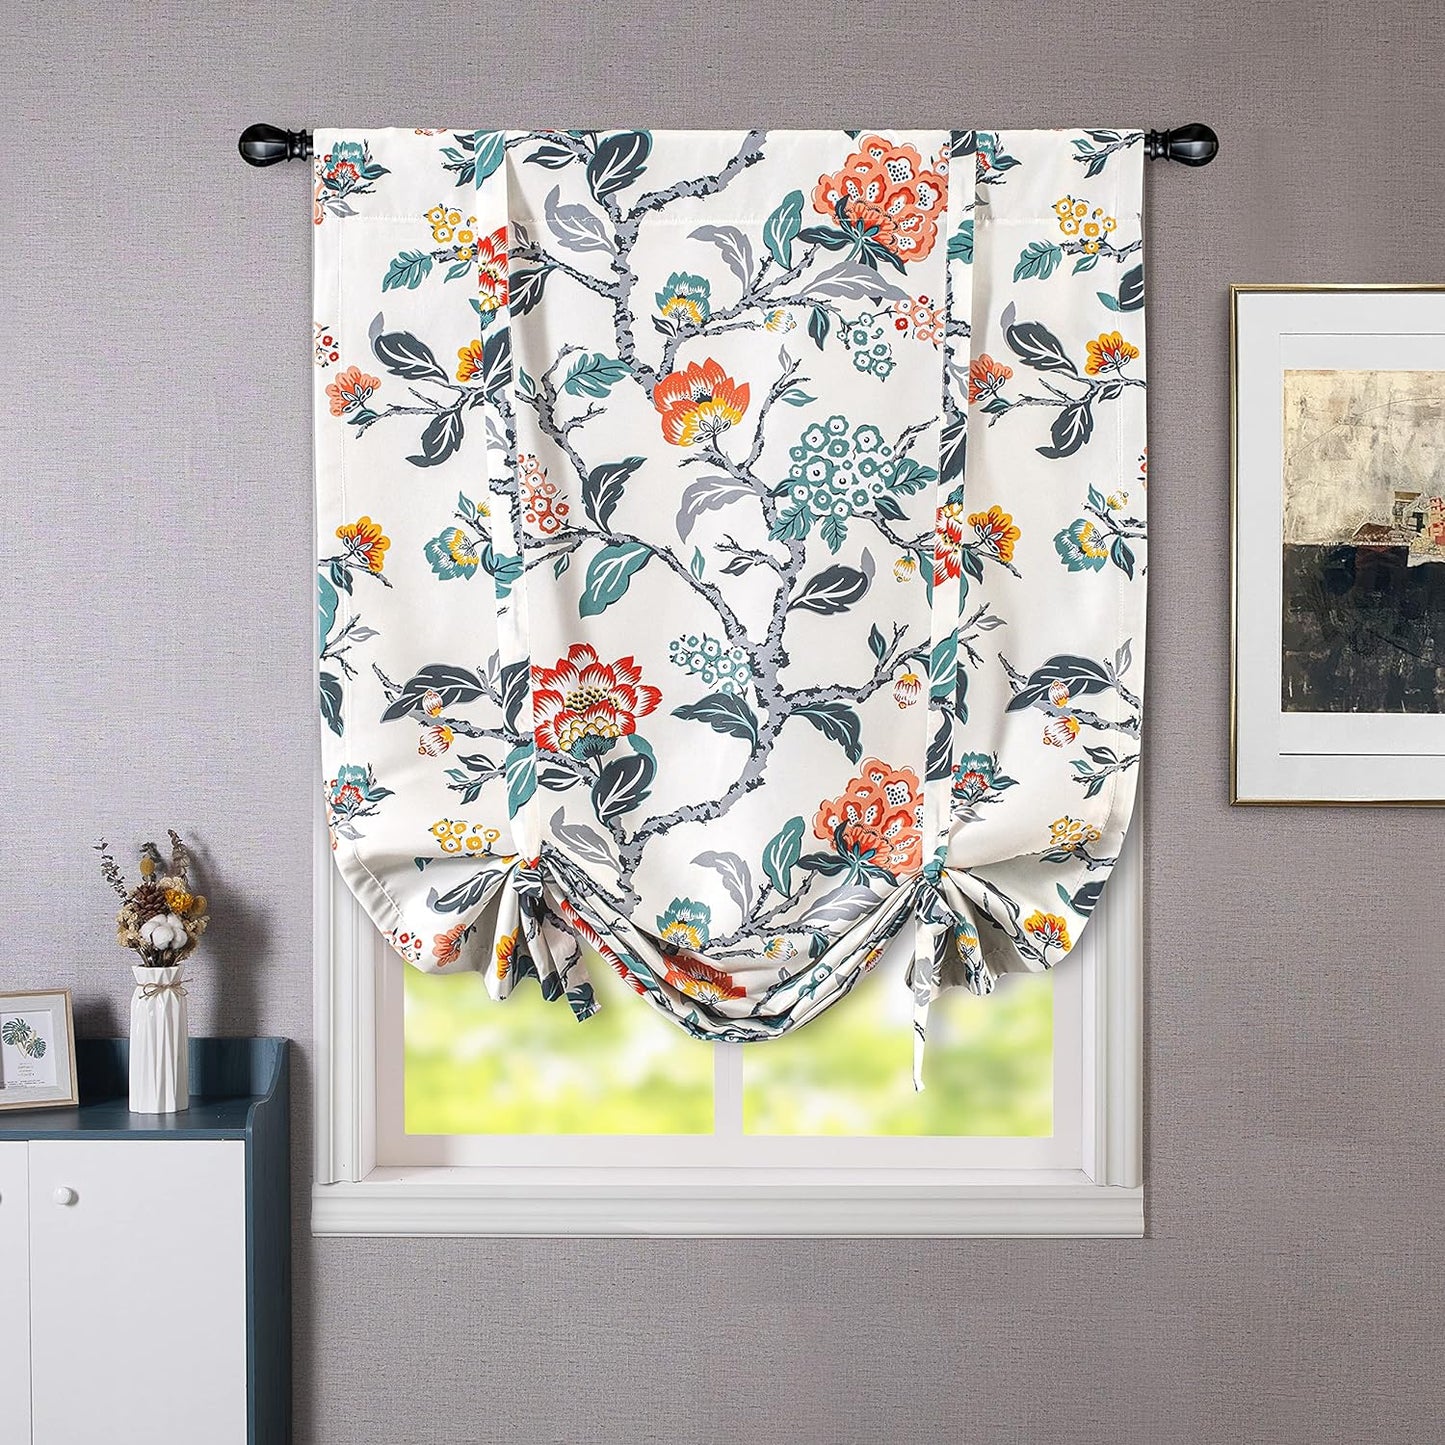 Driftaway Ada Botanical Print Lined Flower Leaf Tie up Curtain Thermal Insulated Privacy Blackout Window Adjustable Balloon Curtain Shade Rod Pocket Single 39 Inch by 55 Inch Ivory Orange Teal  DriftAway   